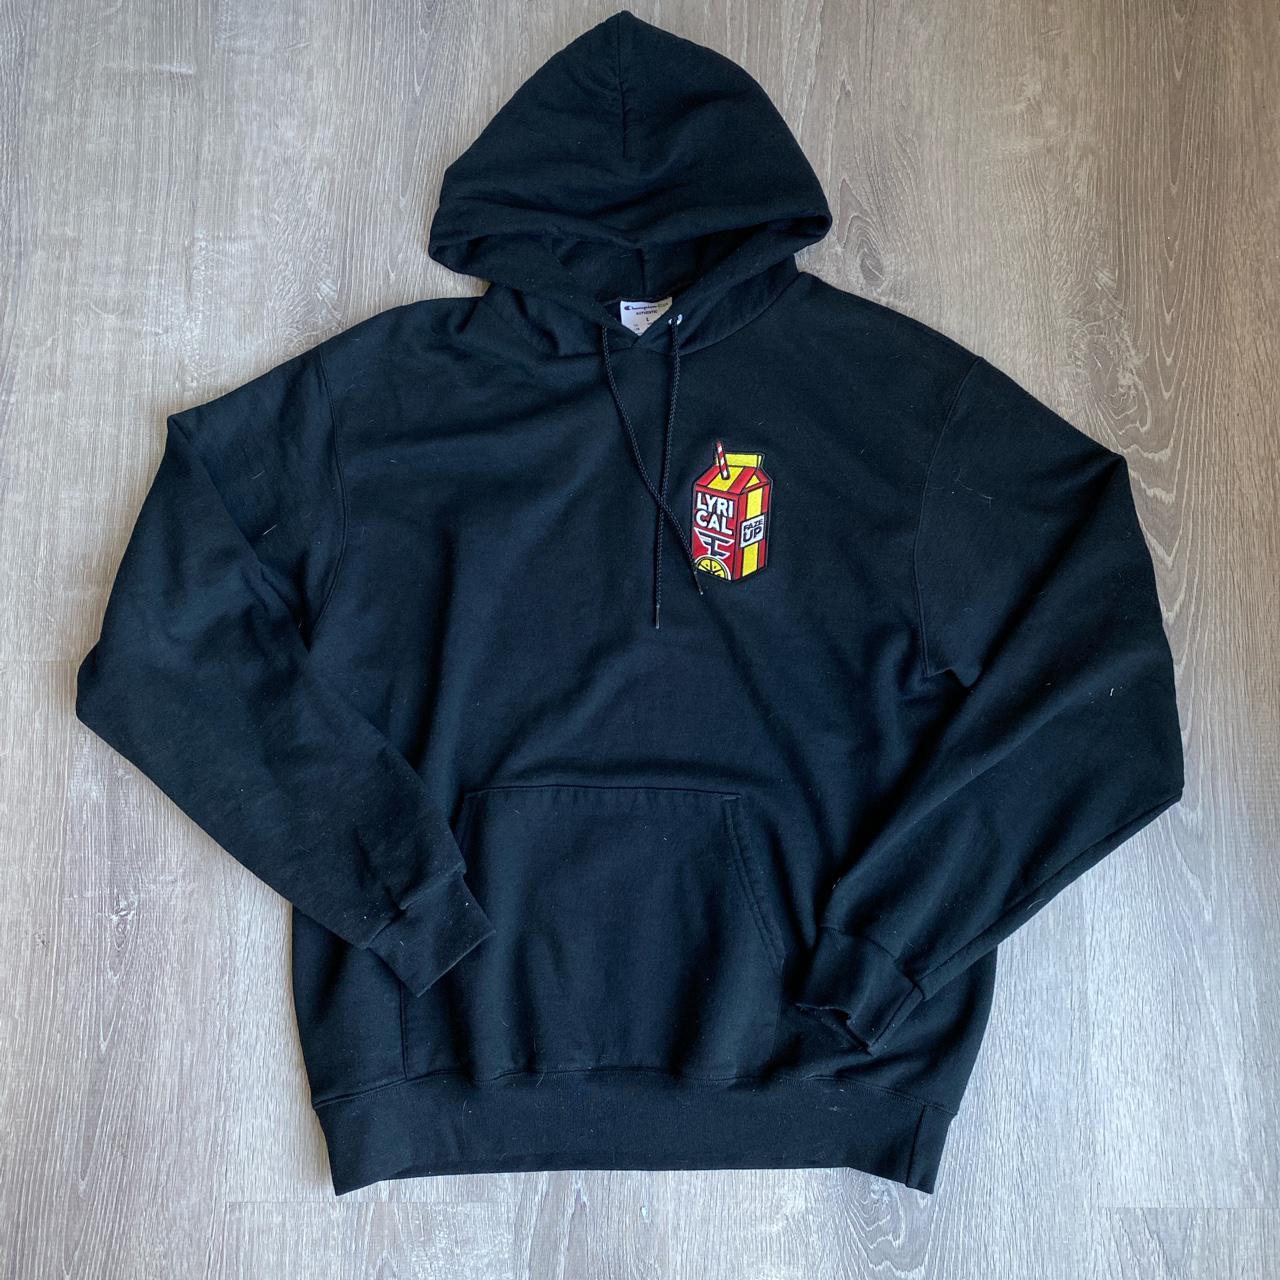 Lyrical x Clan hoodie purchased from... - Depop